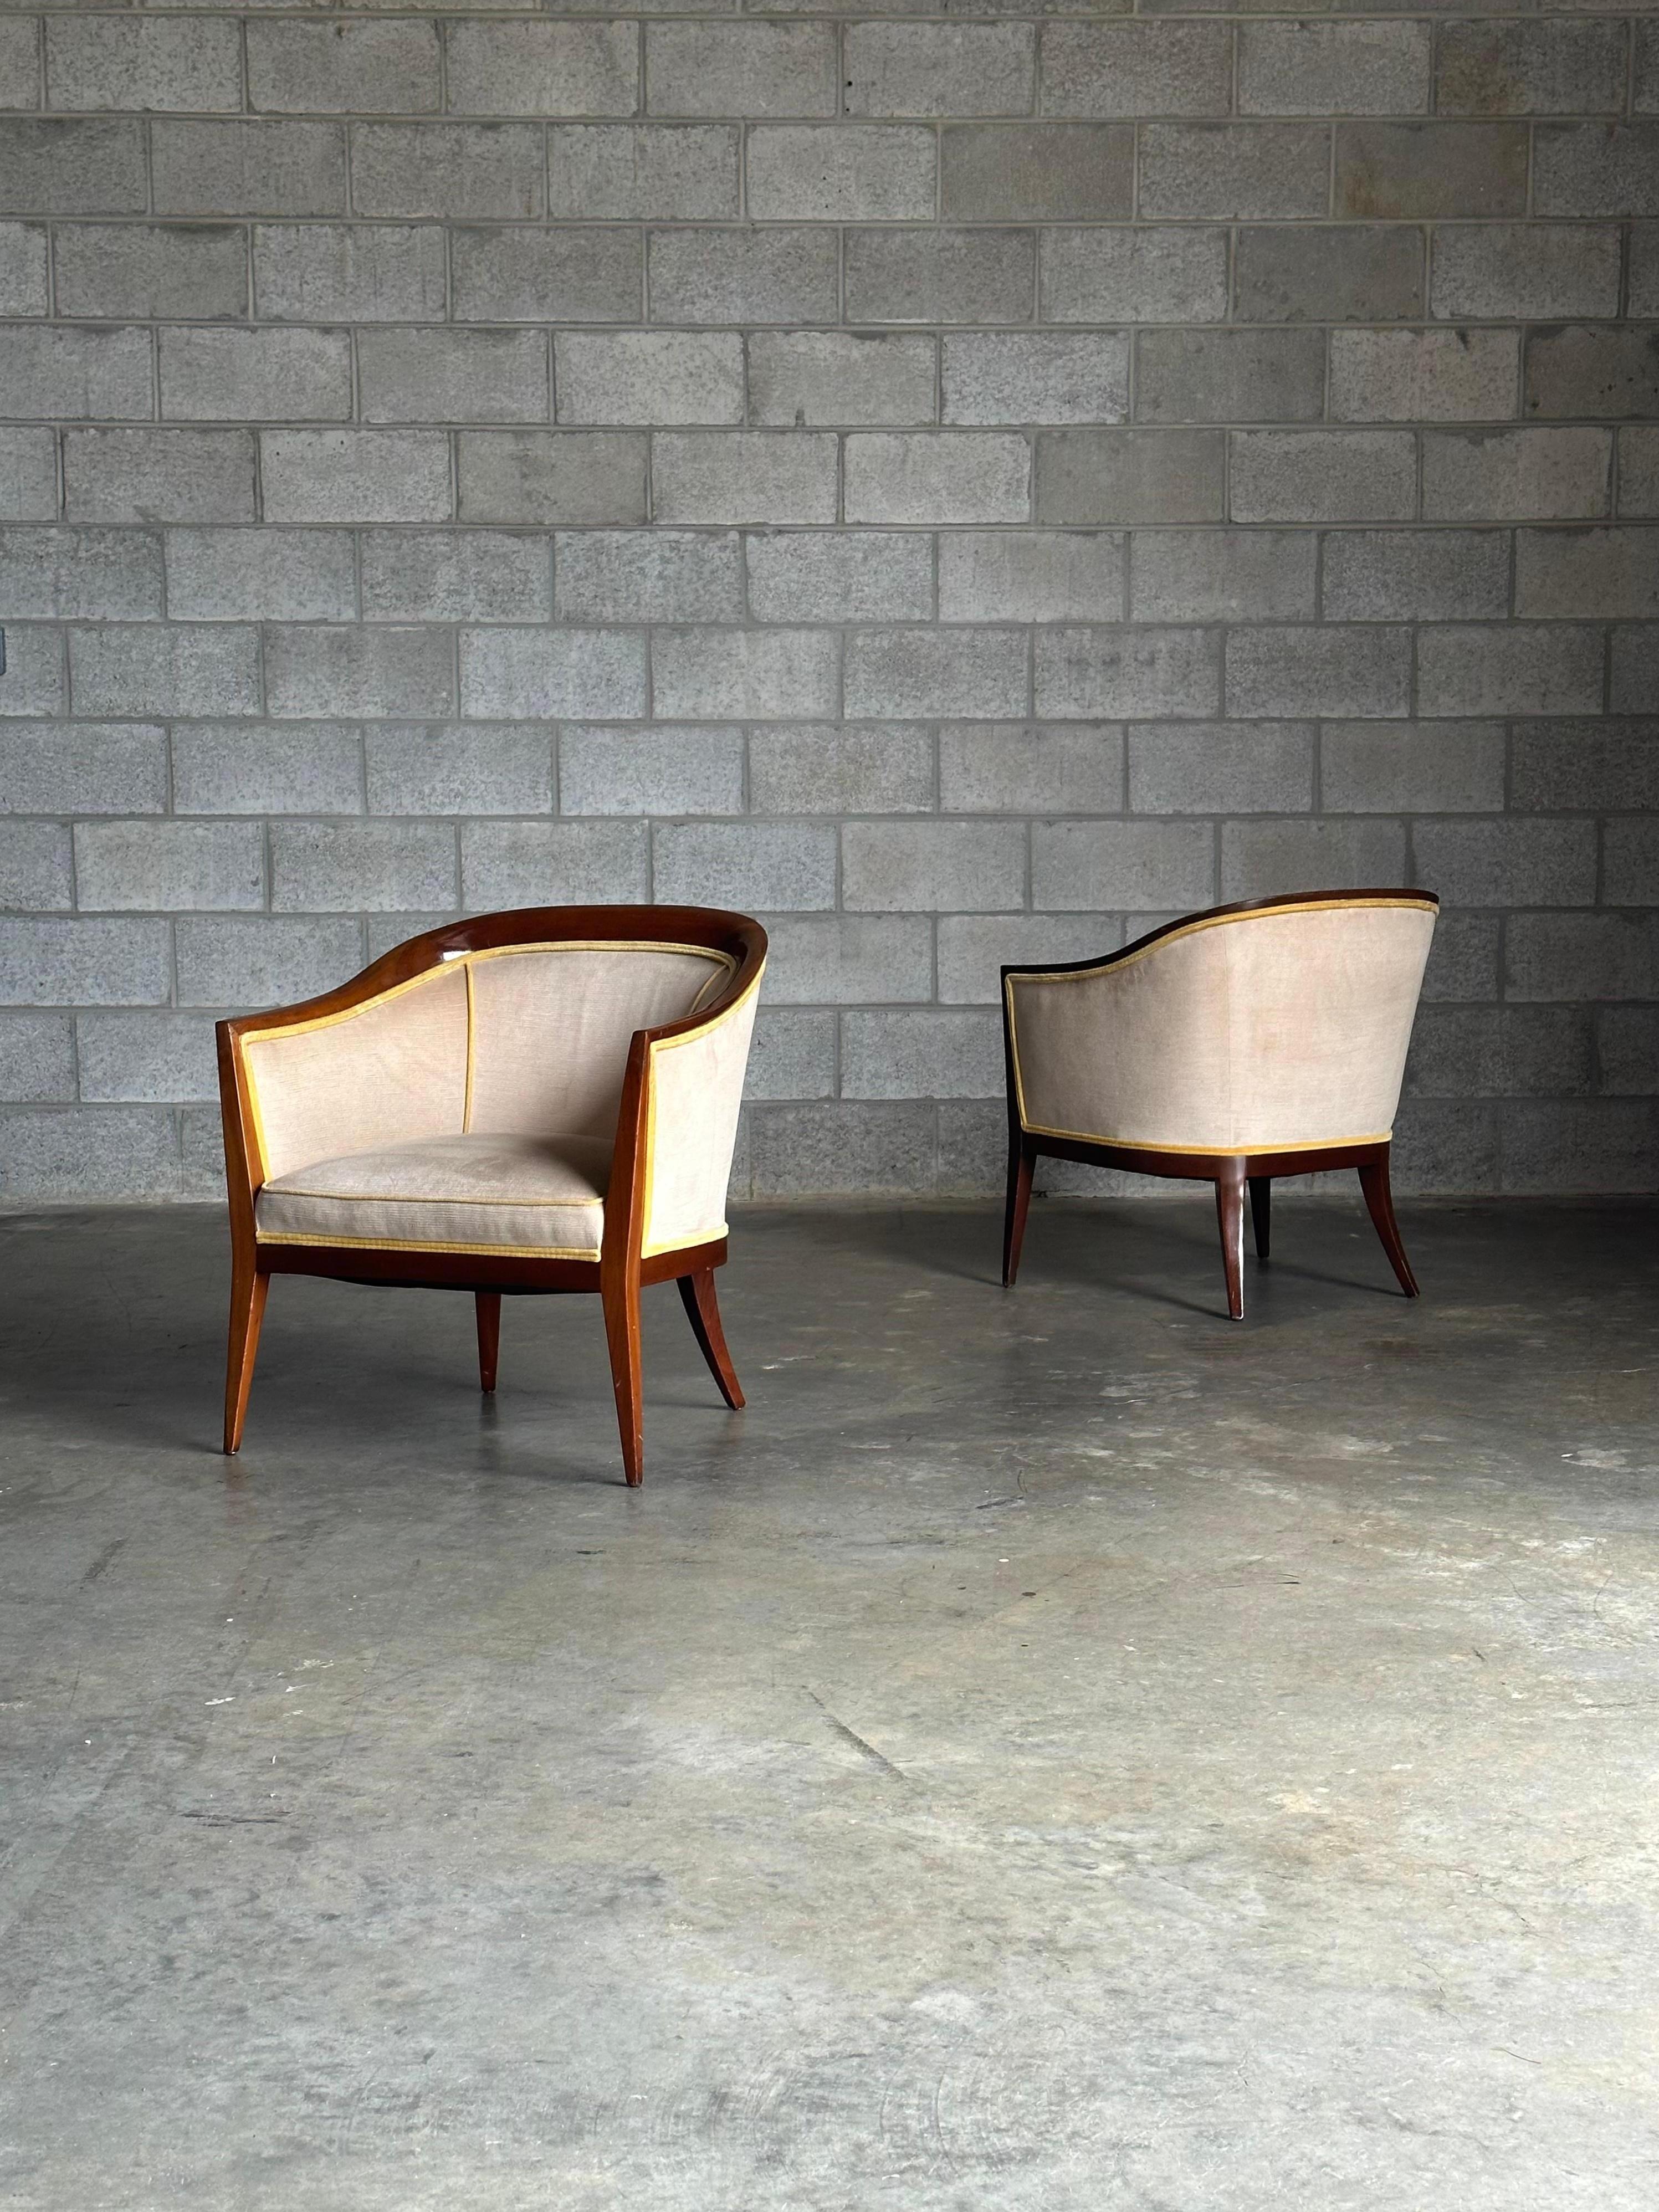 An elegant pair of mid century modern chairs with wonderful sculpted lines. Chairs feature barrel backs accentuated with walnut detail running along the top and continuing into the arms and legs. The chairs were redone at some point in a soft light